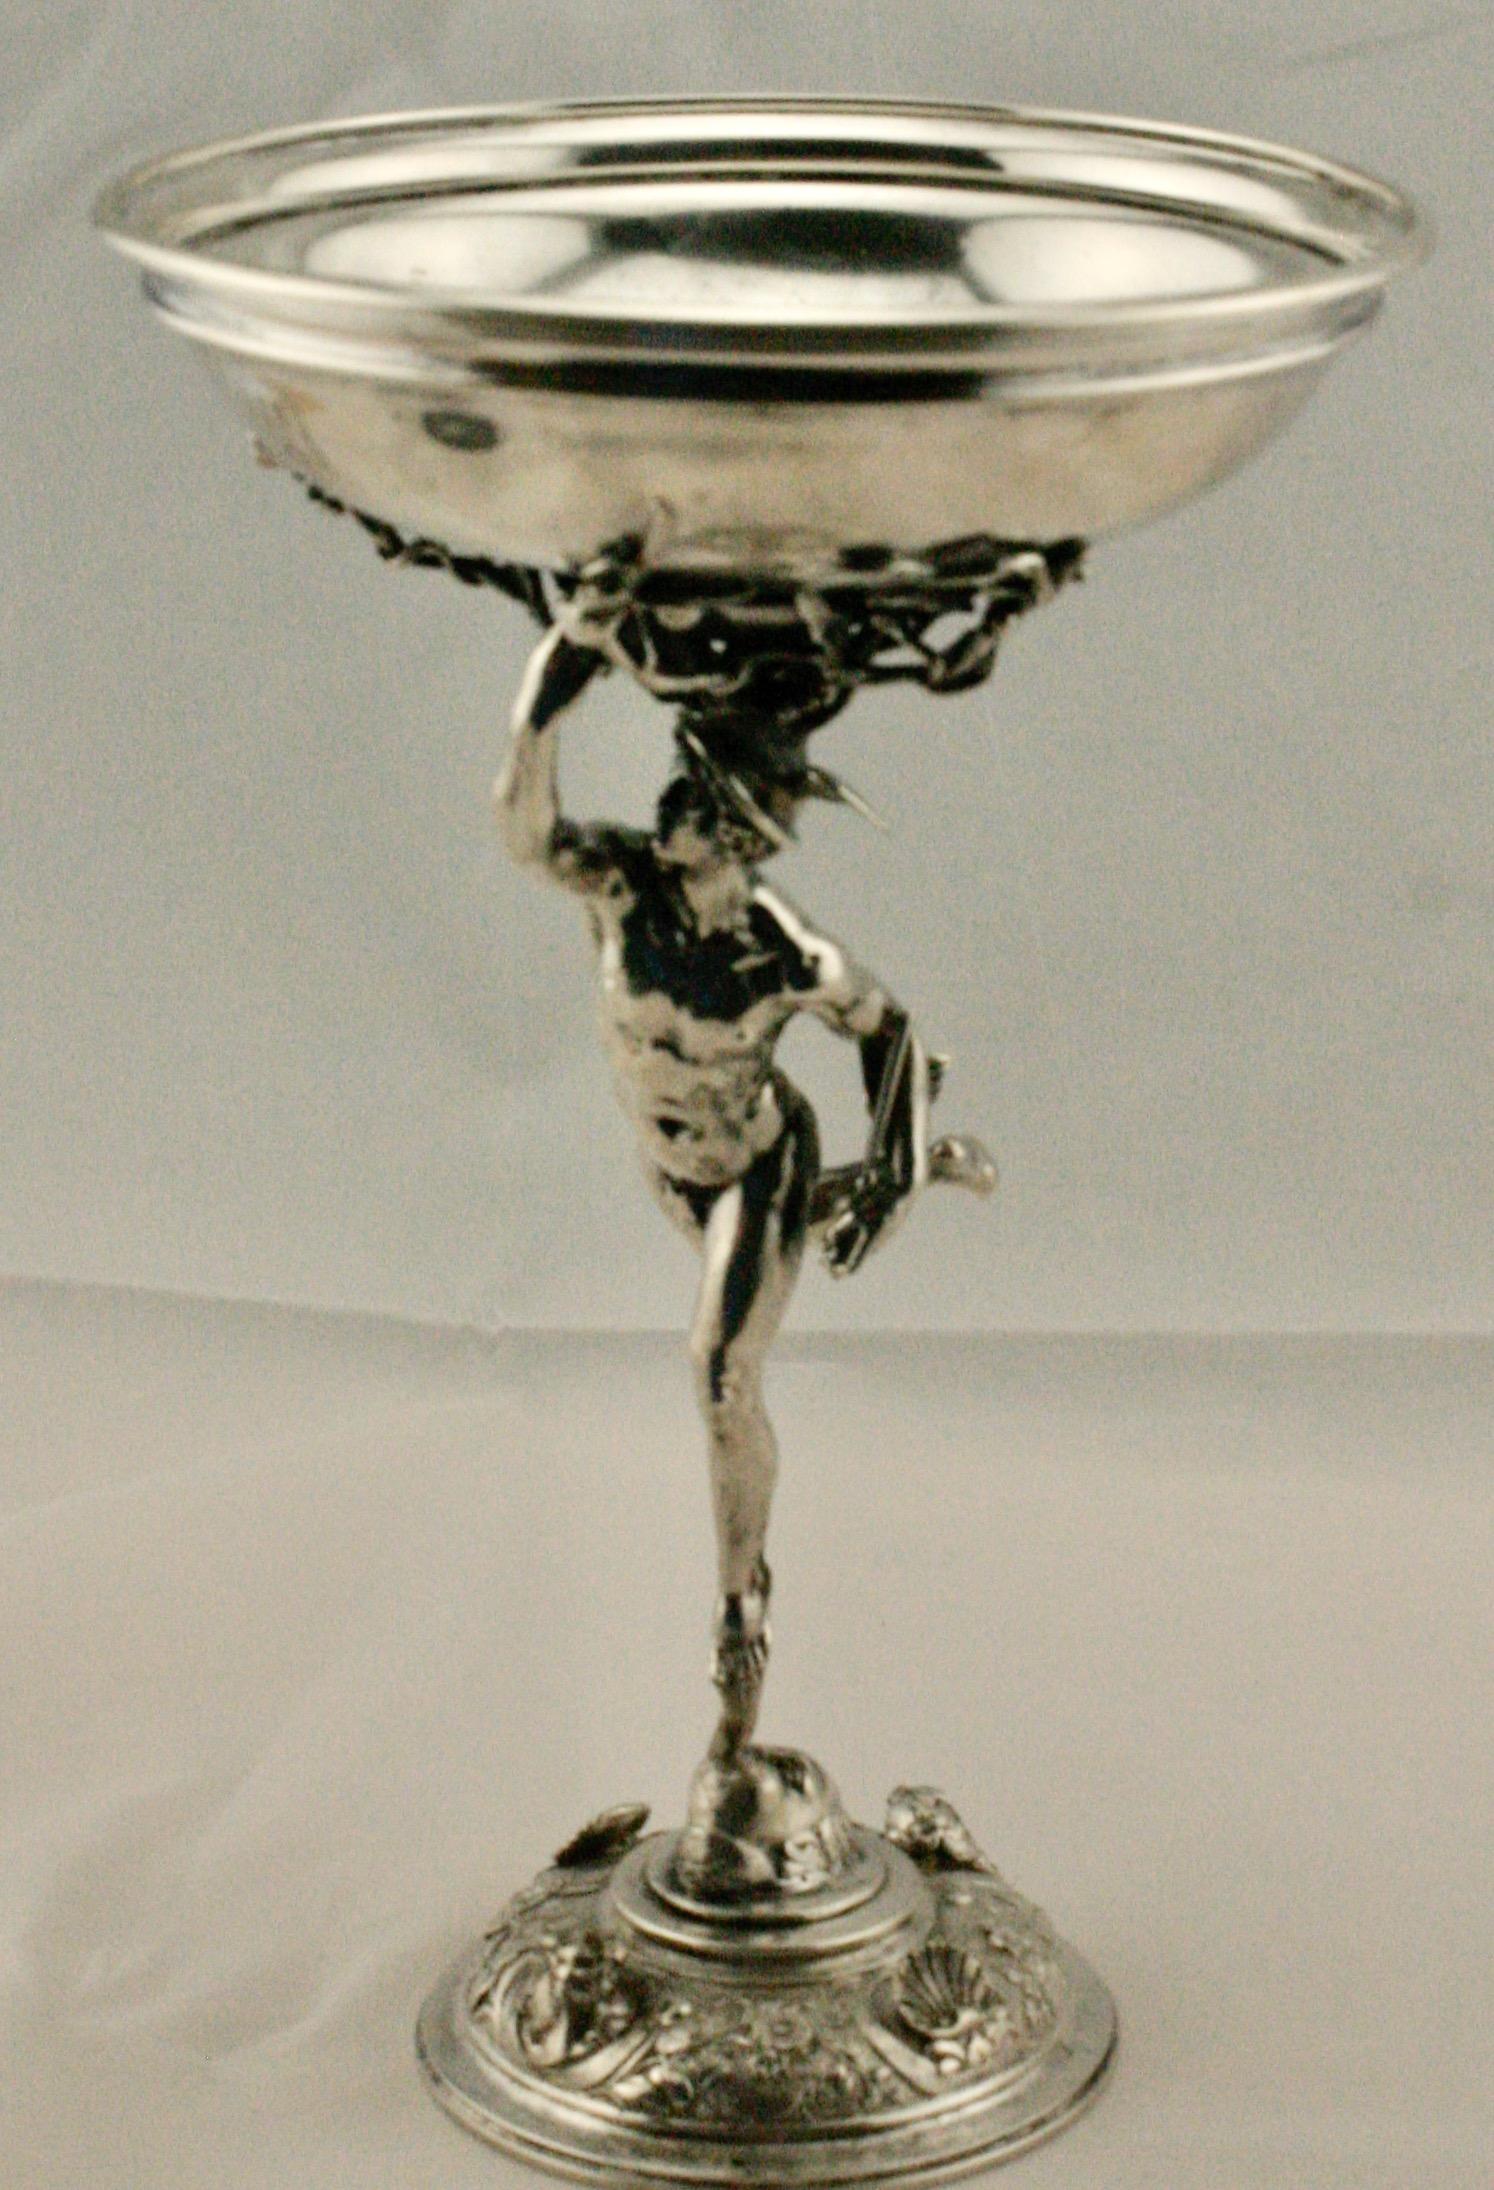 Italian silver compote late 19th century, with mark of G. Accarisi of Firenze/Florence. The compote is in the form of a shallow bowl held aloft by a model of Mercury based on the sculpture of Mercury by Giambologna. It is raised on a domed circular